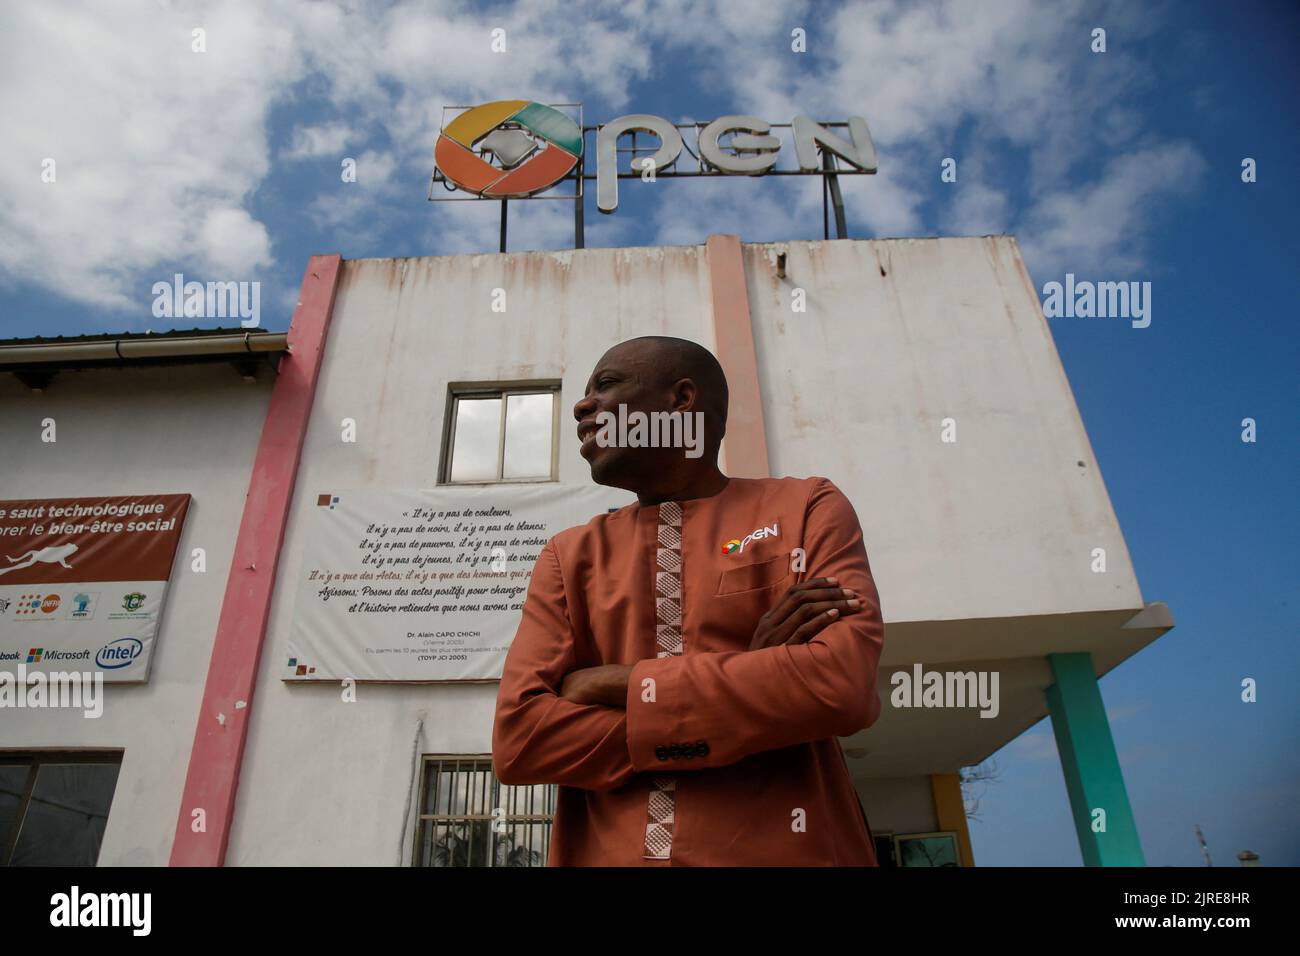 Alain Chichi Capo, the inventor of Open G smartphones, which can speak  local Ivorian languages, stands in front of the factory where the  smartphones are manufactured, in Grand Bassam, Ivory Coast July